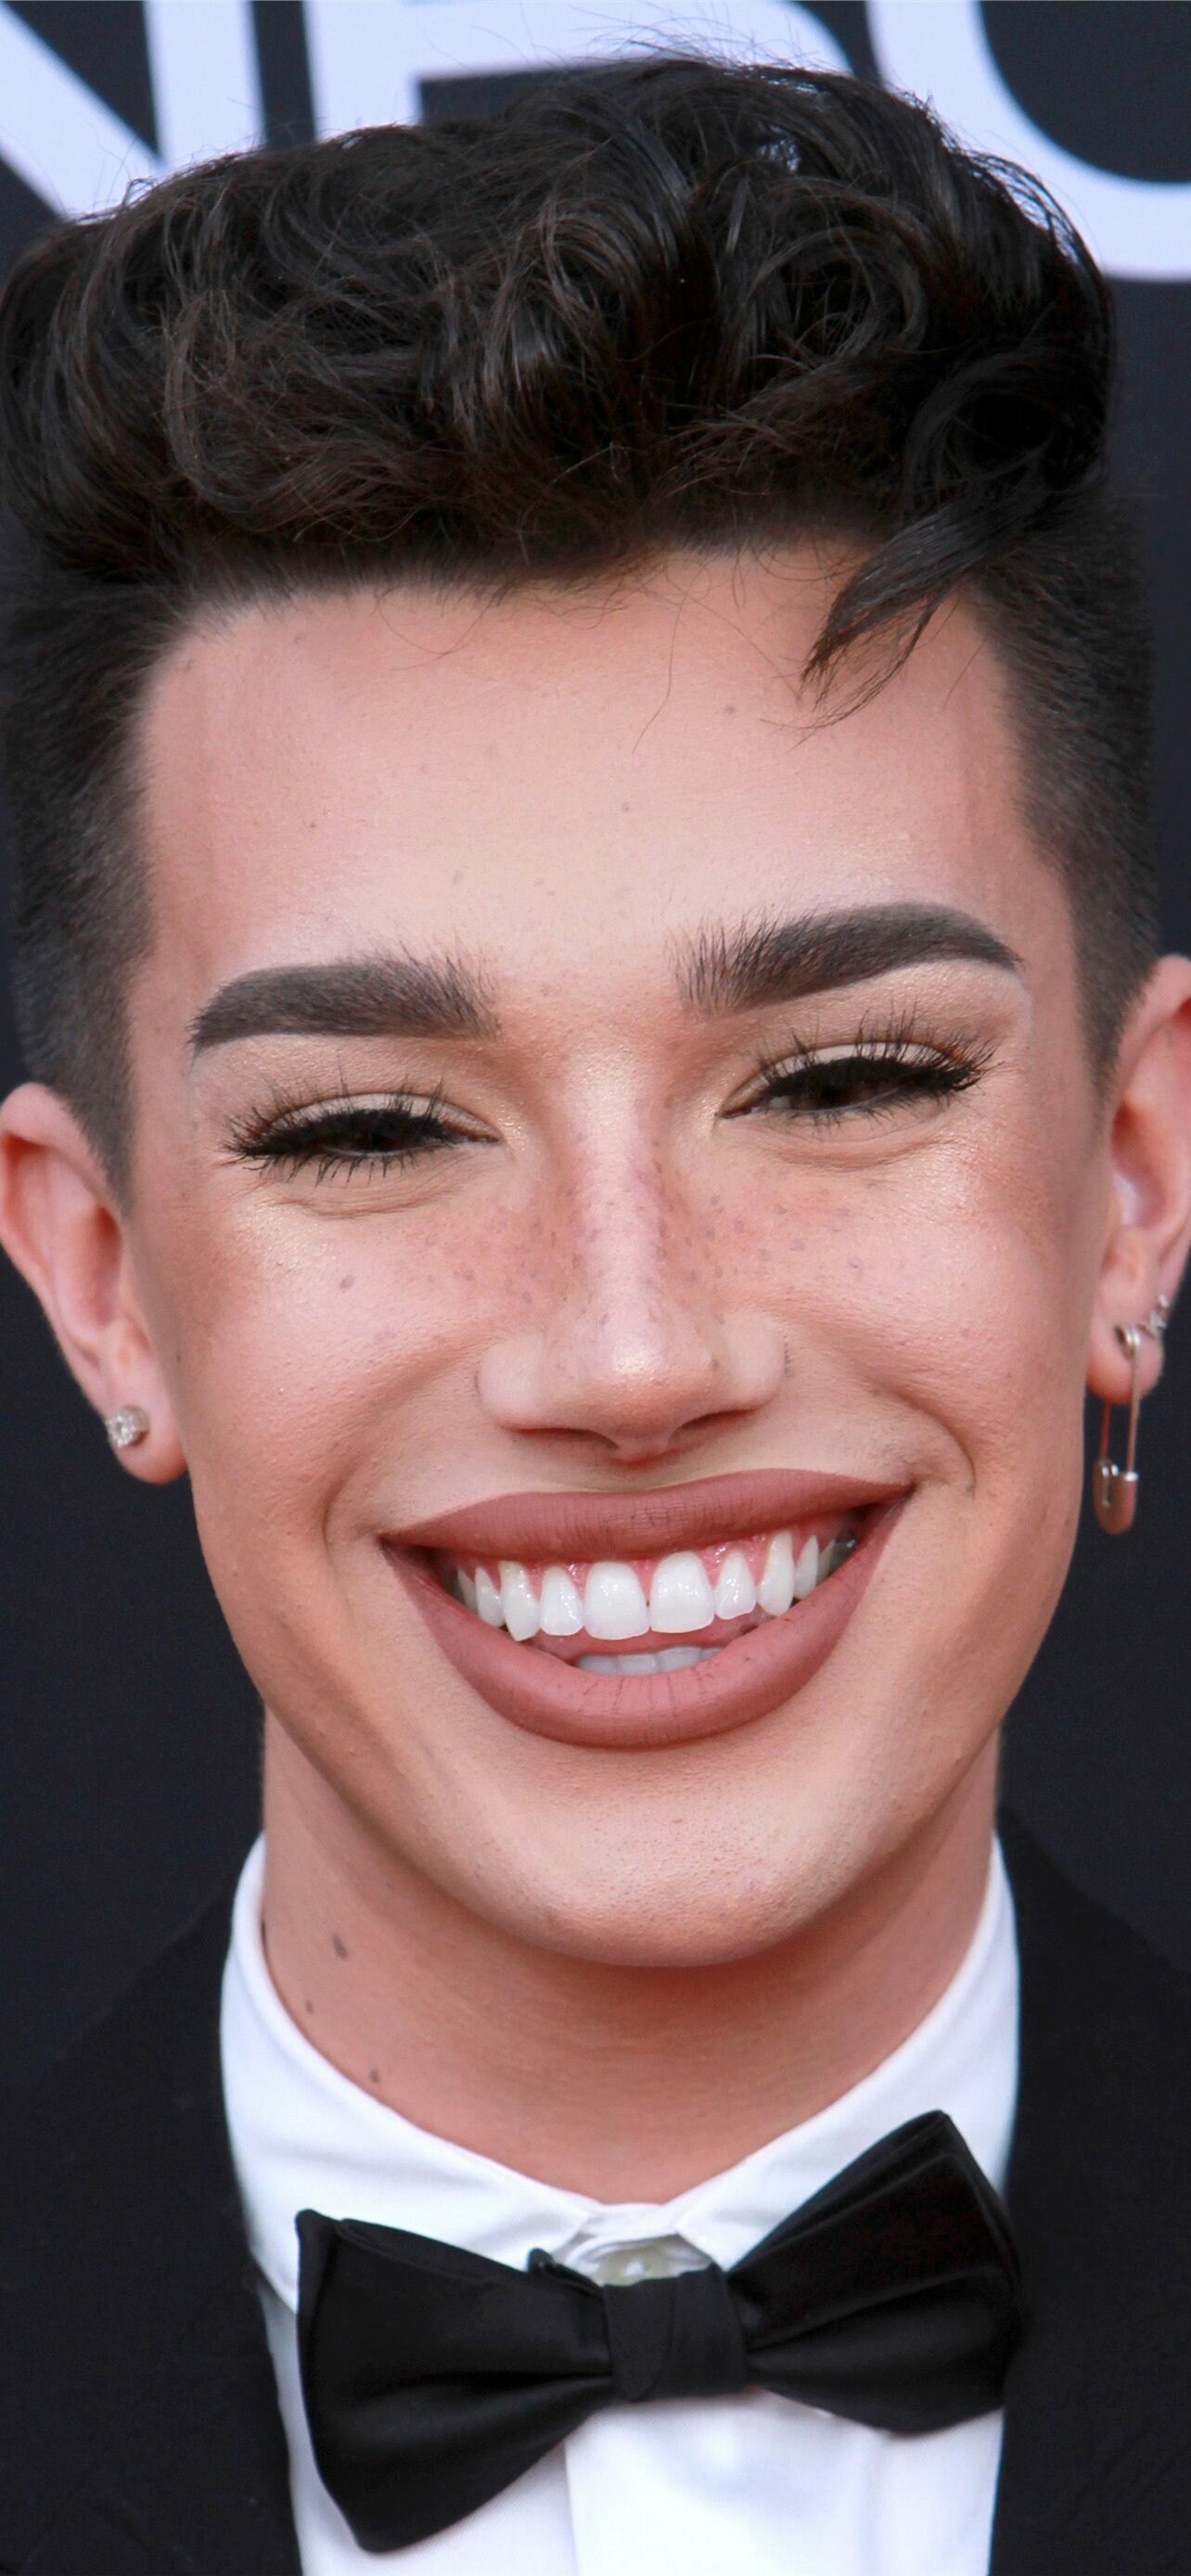 James Charles, iPhone wallpapers, Free download, Background wallpapers, 1290x2780 HD Phone